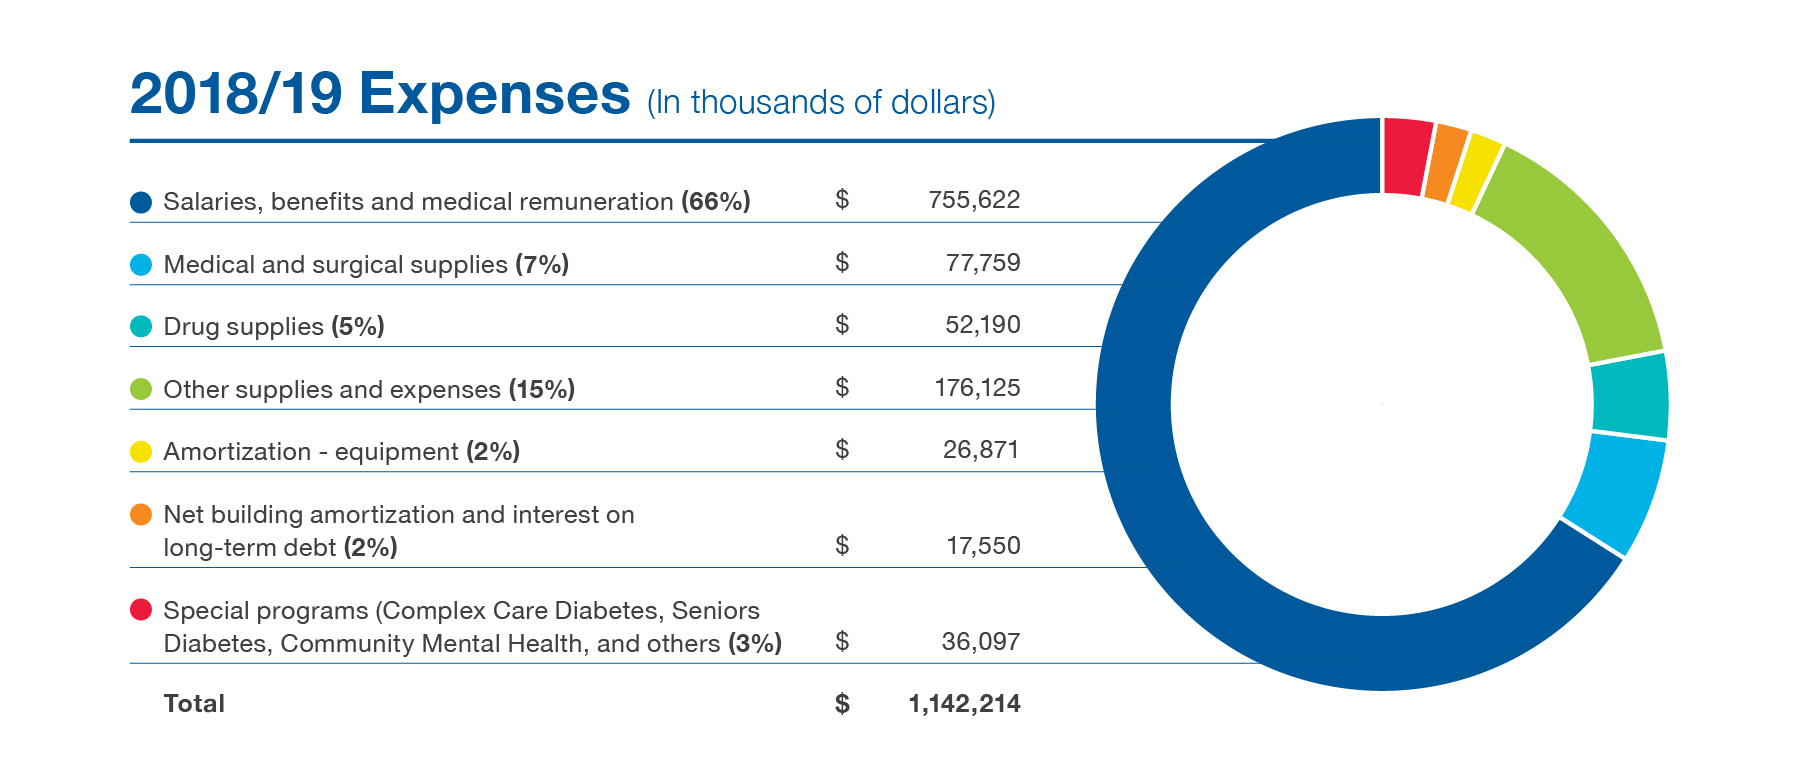 2018/19 Expenses (in thousands of dollars): Salaries, benefits and medical remuneration (66%) $755,622. Medical and Surgical supplies (7%) $77,759. Drug supplies (5%) $52,190. Other supplies and expenses (15%) $176,125. Amortization – equipment (2%) $26,871. Net building amortization and interest on long-term debt (2%) $17,550. Special programs (Complex Care Diabetes, Seniors Diabetes, Community Mental Health, and others (3%) $36,097. TOTAL: $1,142,214